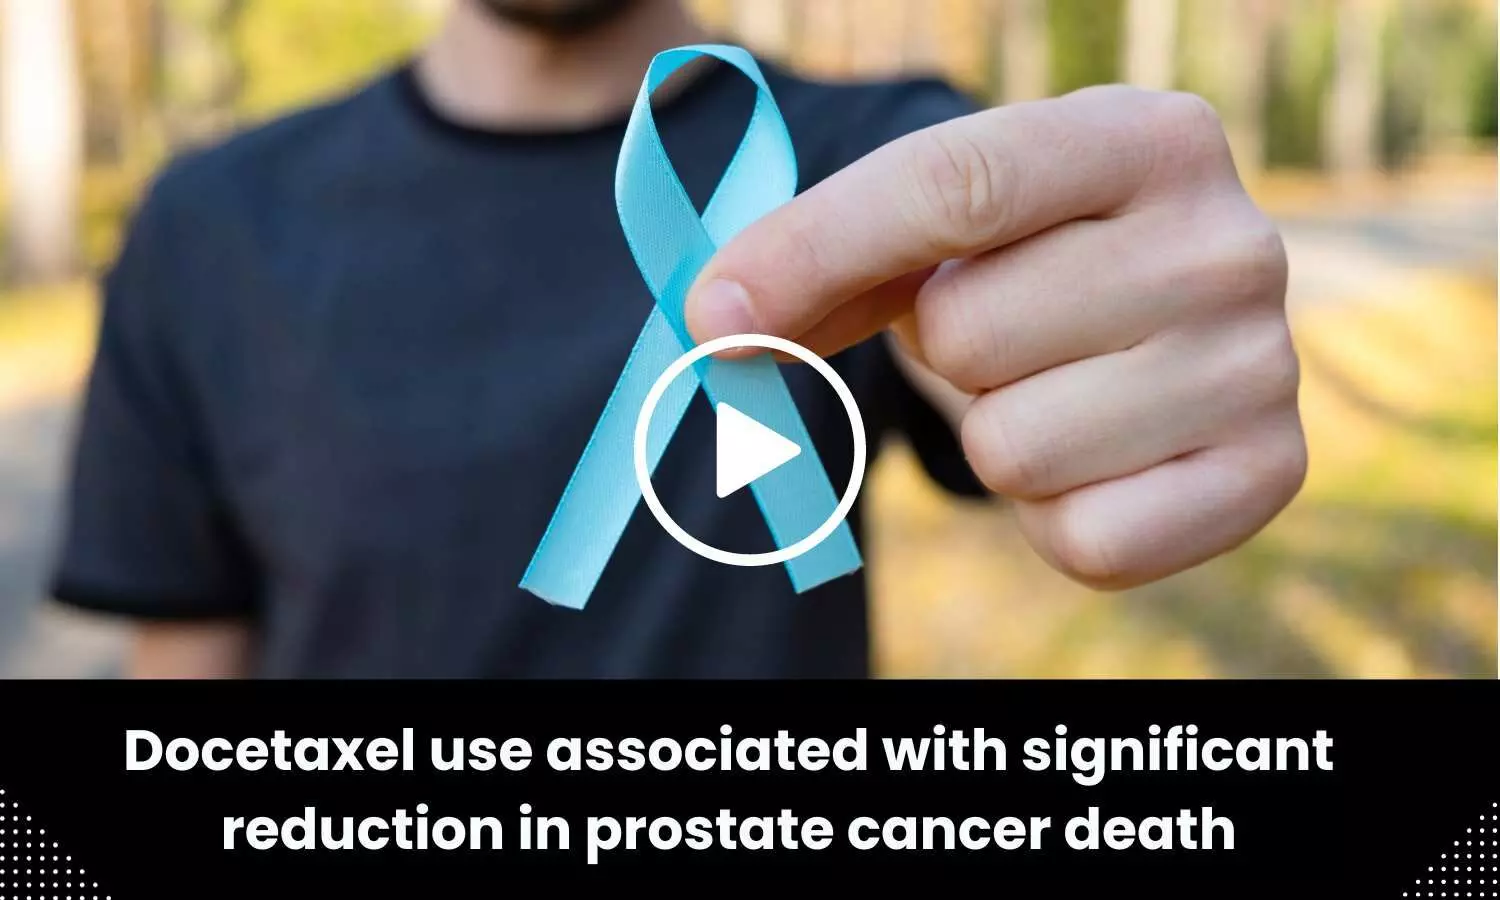 Docetaxel use associated with significant reduction in prostate cancer death